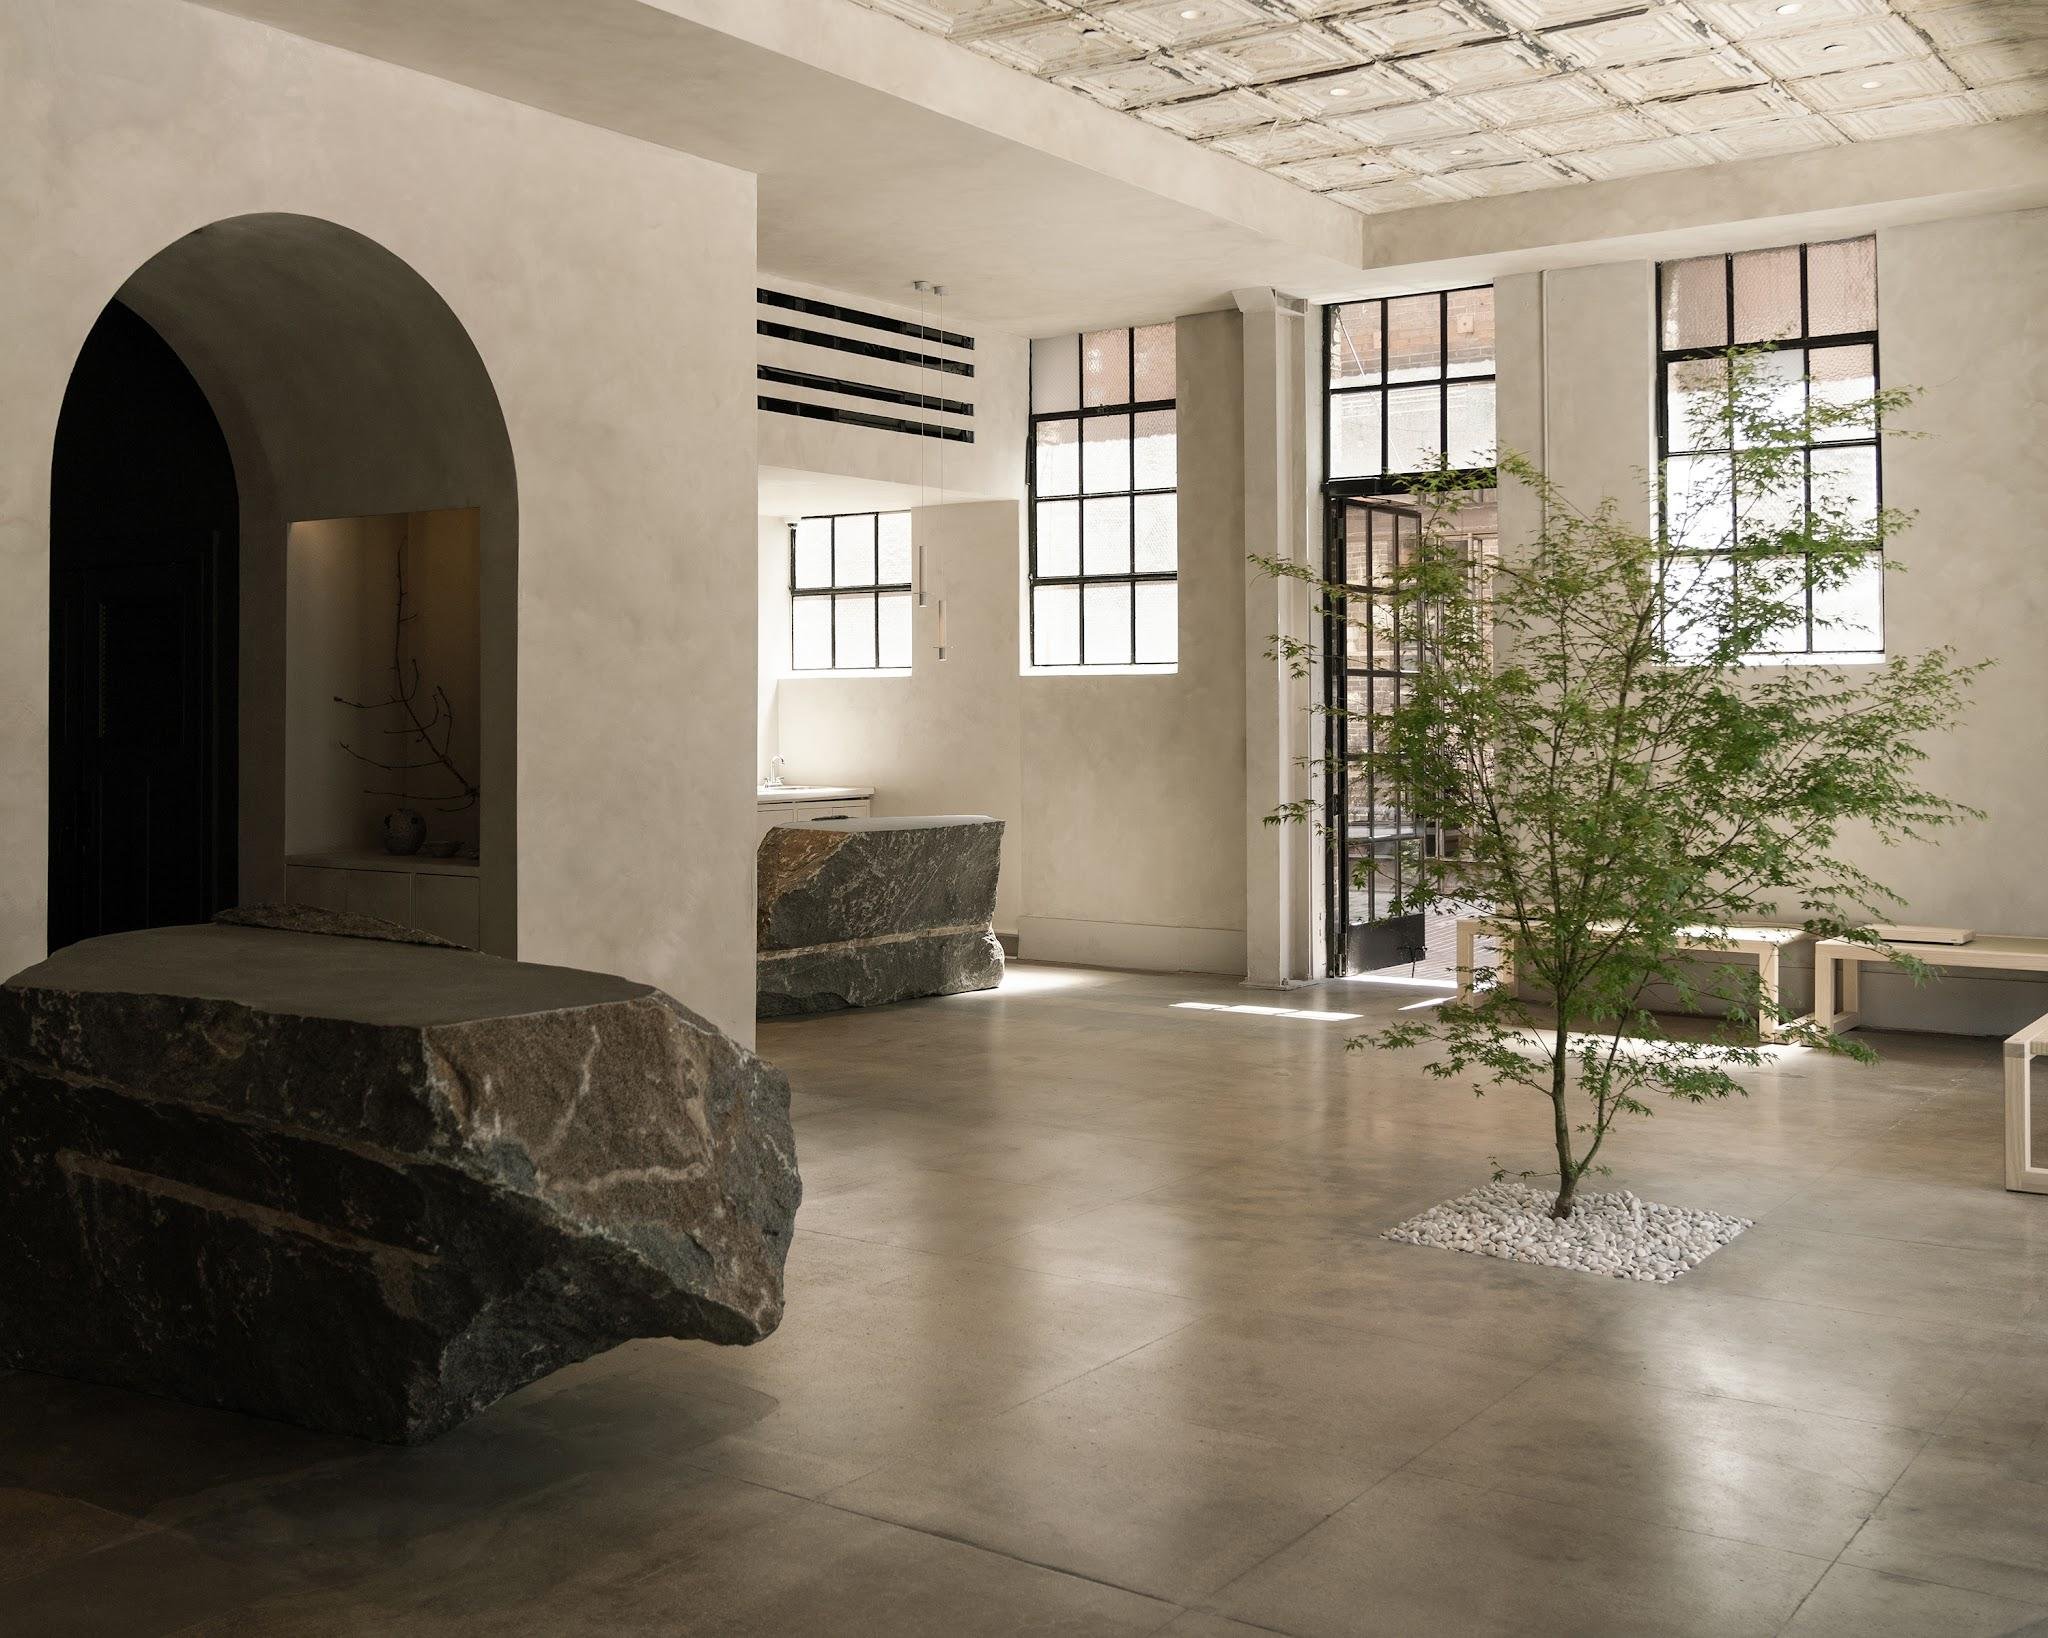  an unexpected tree in an immaculate space for kensho ryokan in downtown la / in collaboration with zak cook  